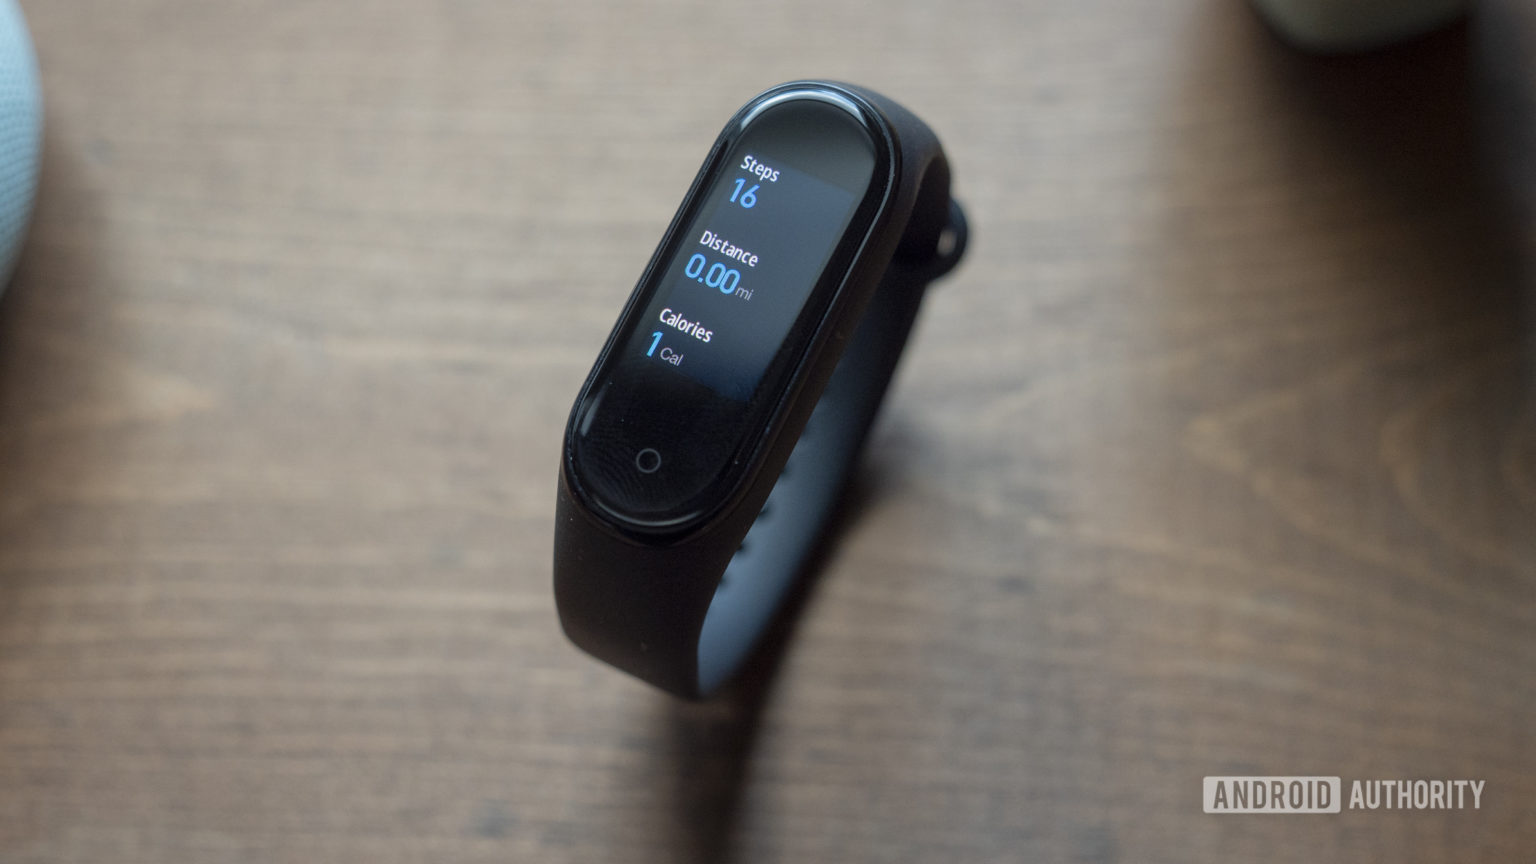 Xiaomi Mi Fitness Tracker Which Stores Music - Wearable Fitness Trackers